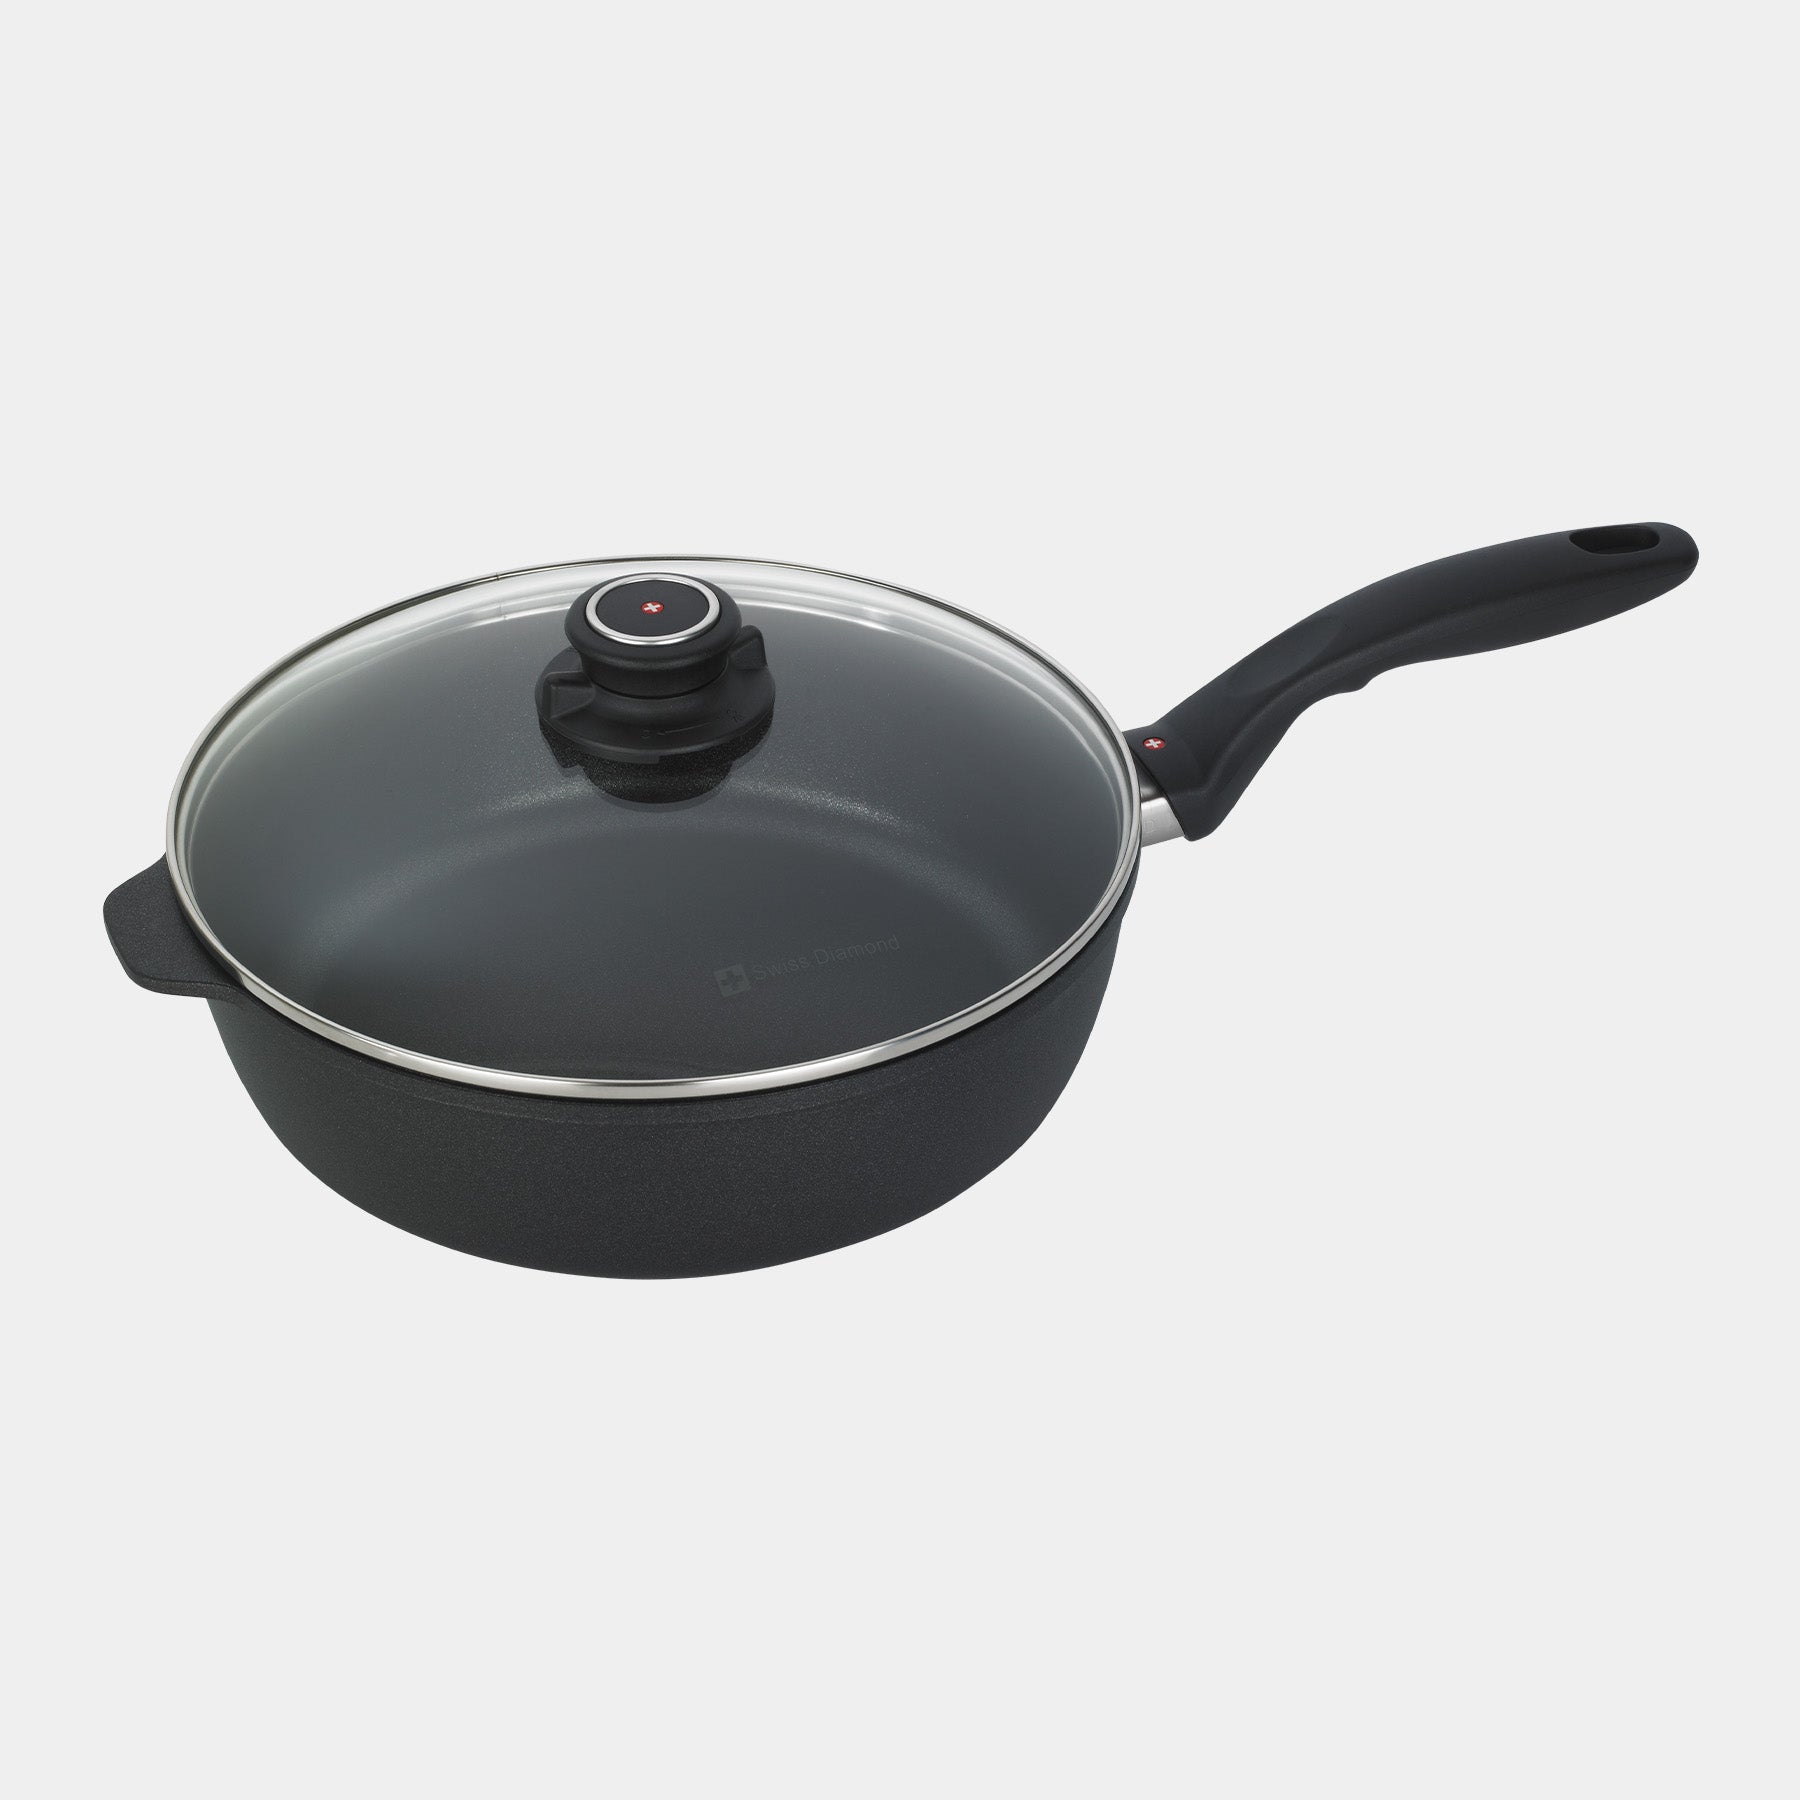 XD Nonstick 3.8 qt Saute Pan with Glass Lid